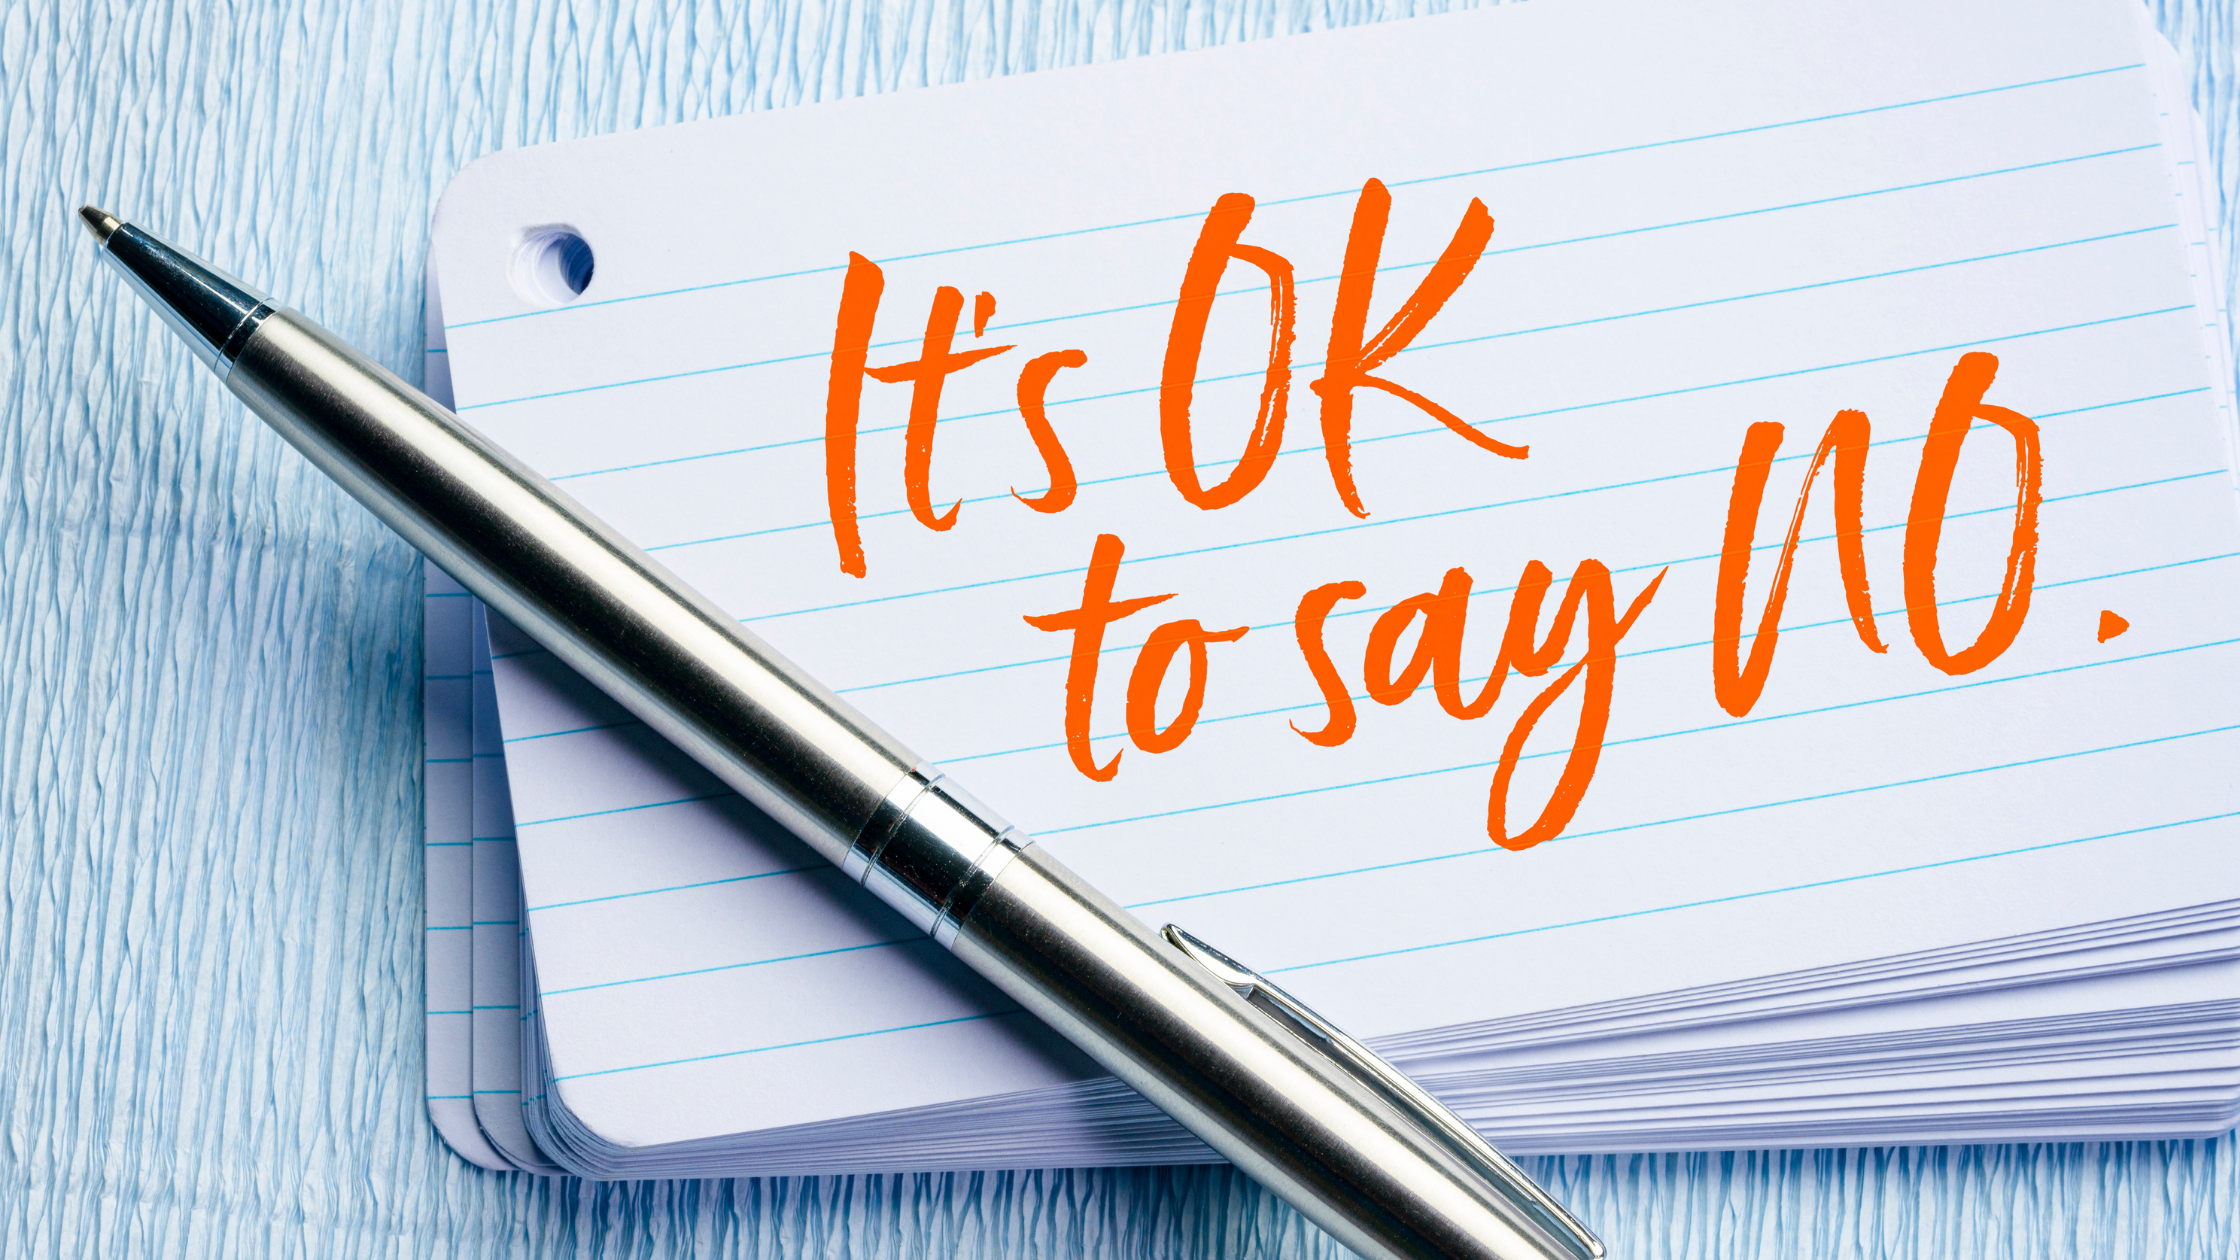 It's ok to say no